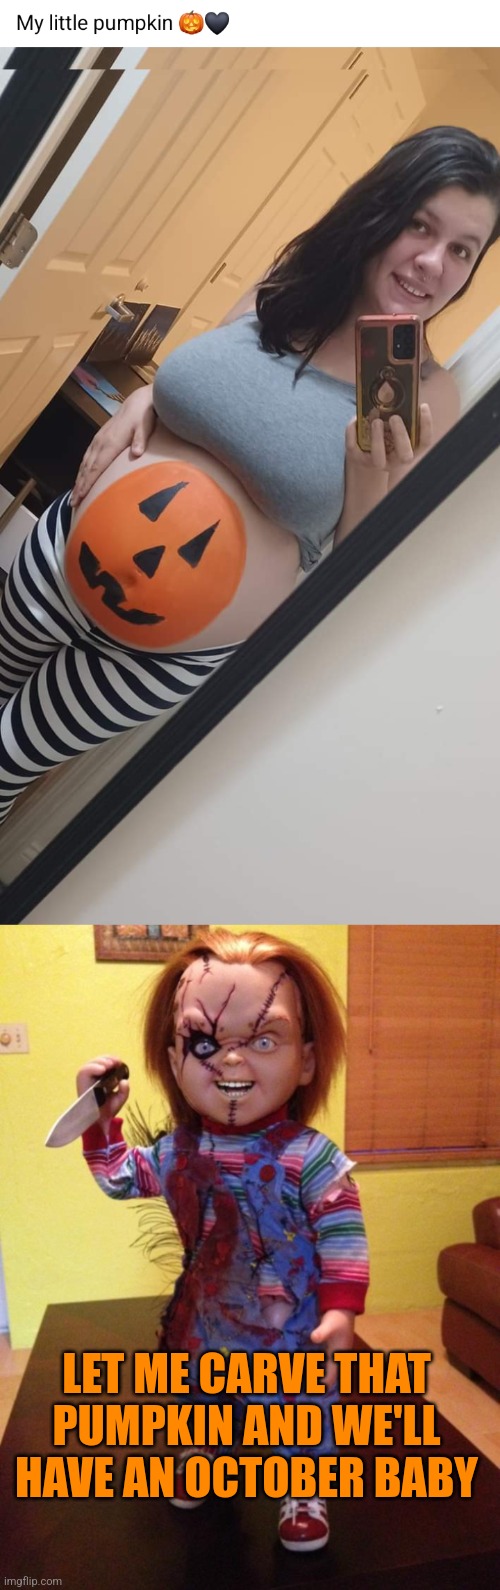 CARVE THE PUMPKIN | LET ME CARVE THAT PUMPKIN AND WE'LL HAVE AN OCTOBER BABY | image tagged in chucky,dark humor,pumpkin,pregnant woman,spooktober | made w/ Imgflip meme maker